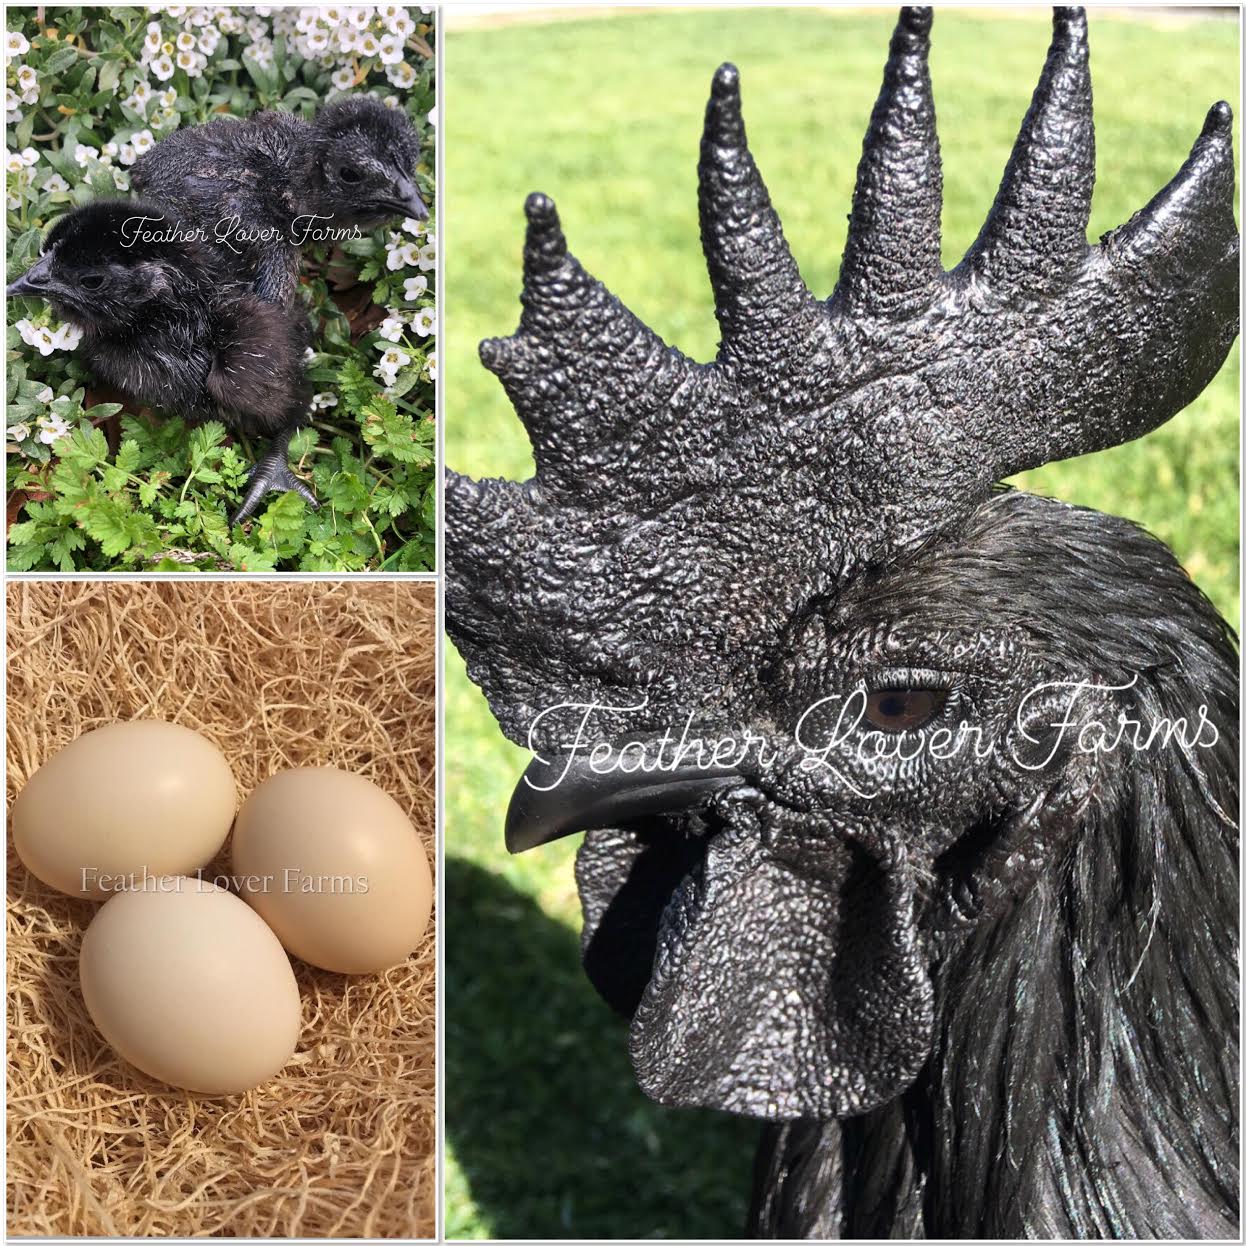 Ayam Cemani Chicken: Baby Chicks for Sale